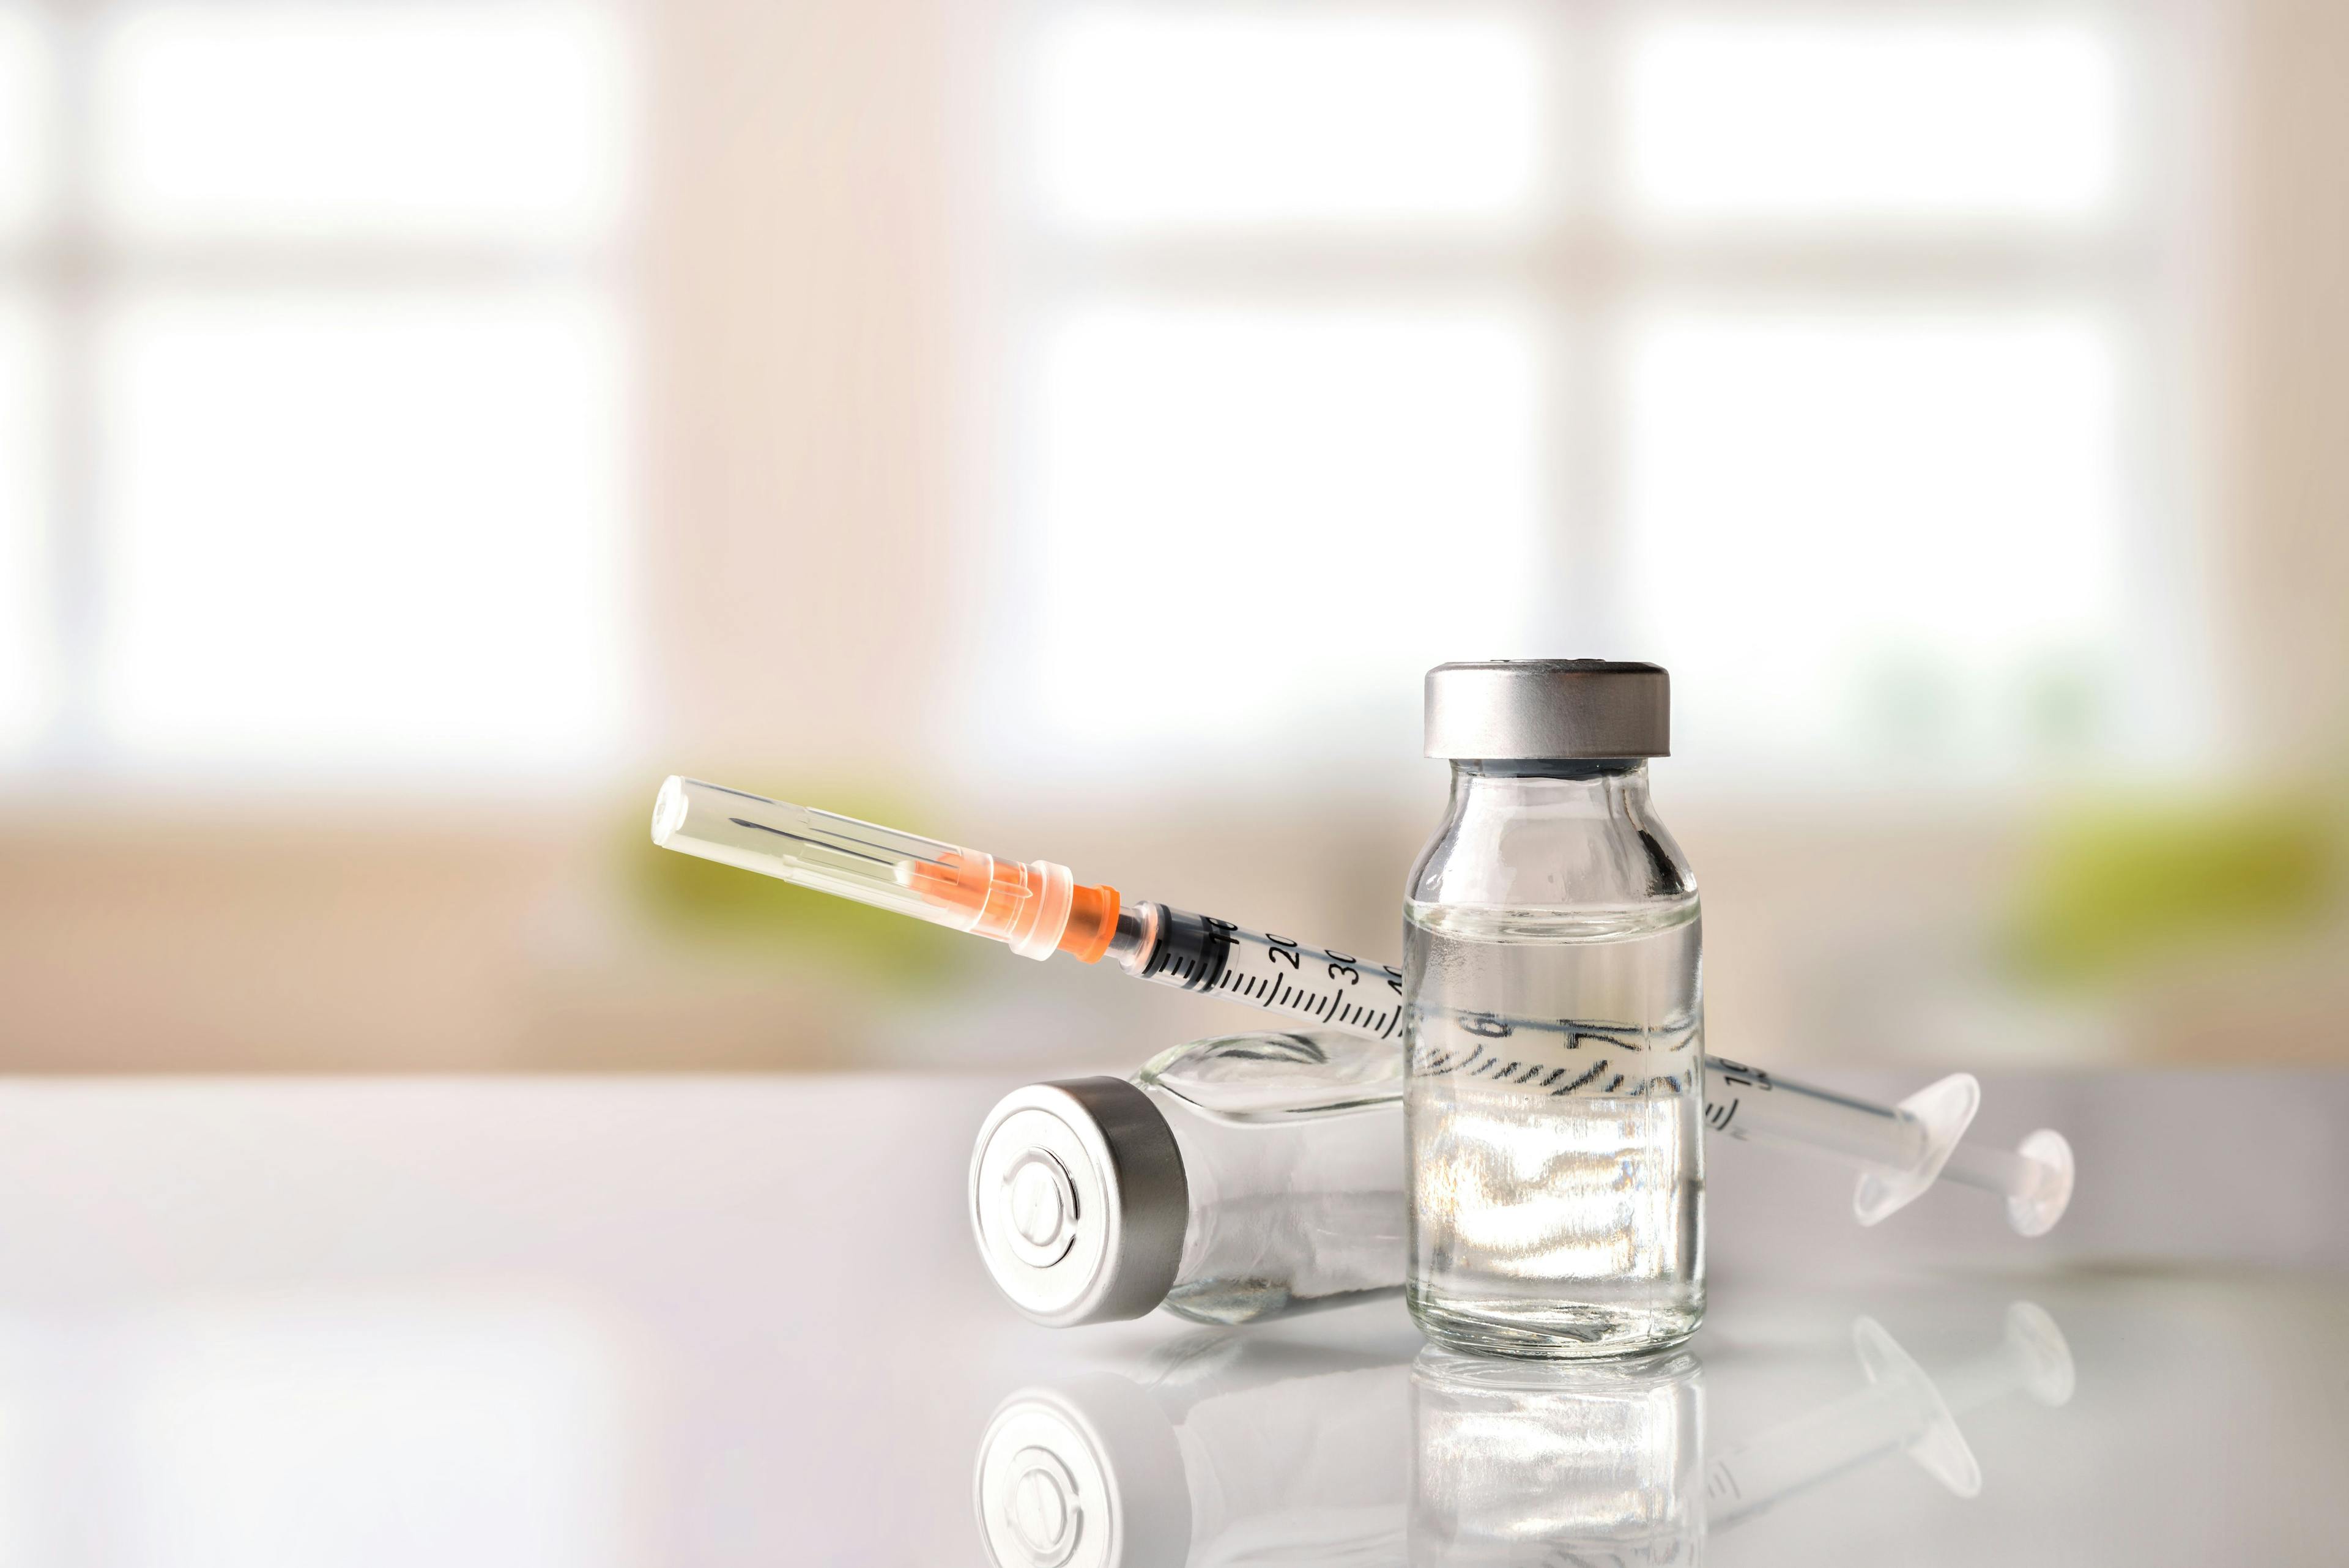 Vials and syringe on white table with background windows | Image Credit – Davizro Photography - stock.adobe.com